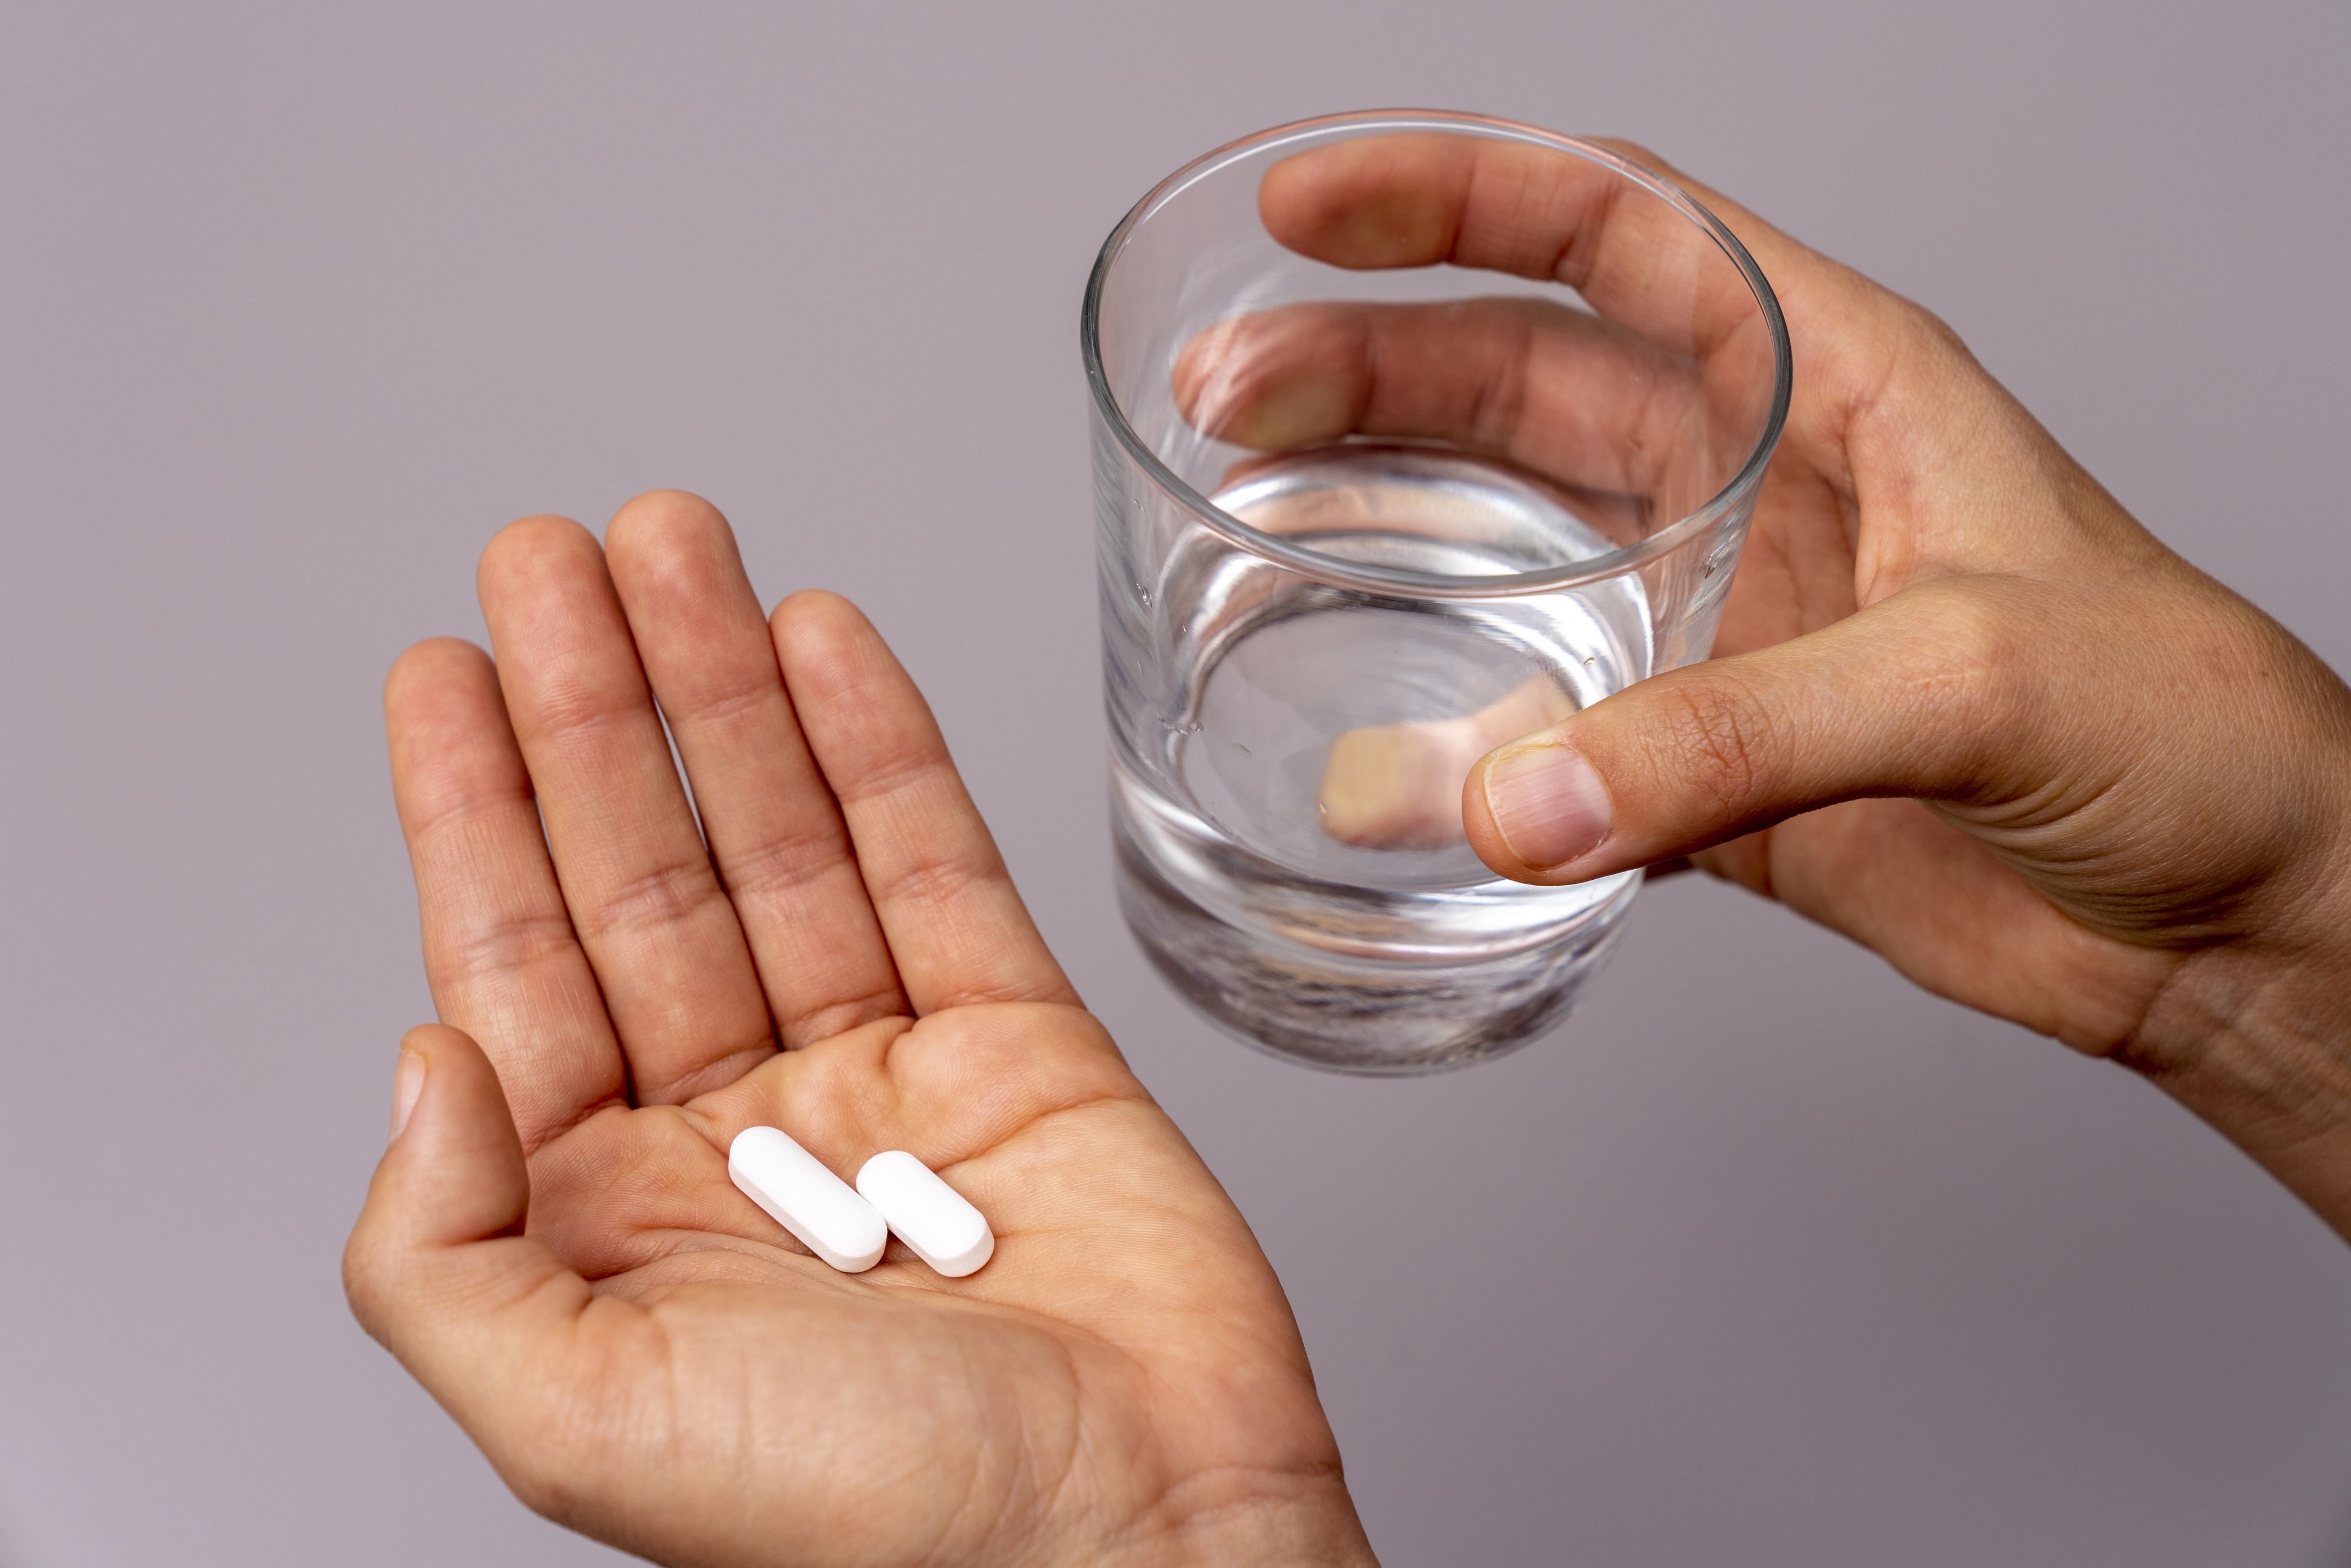 Hand holding pills with another hand holding a glass of water, implying medication or health management in a workplace